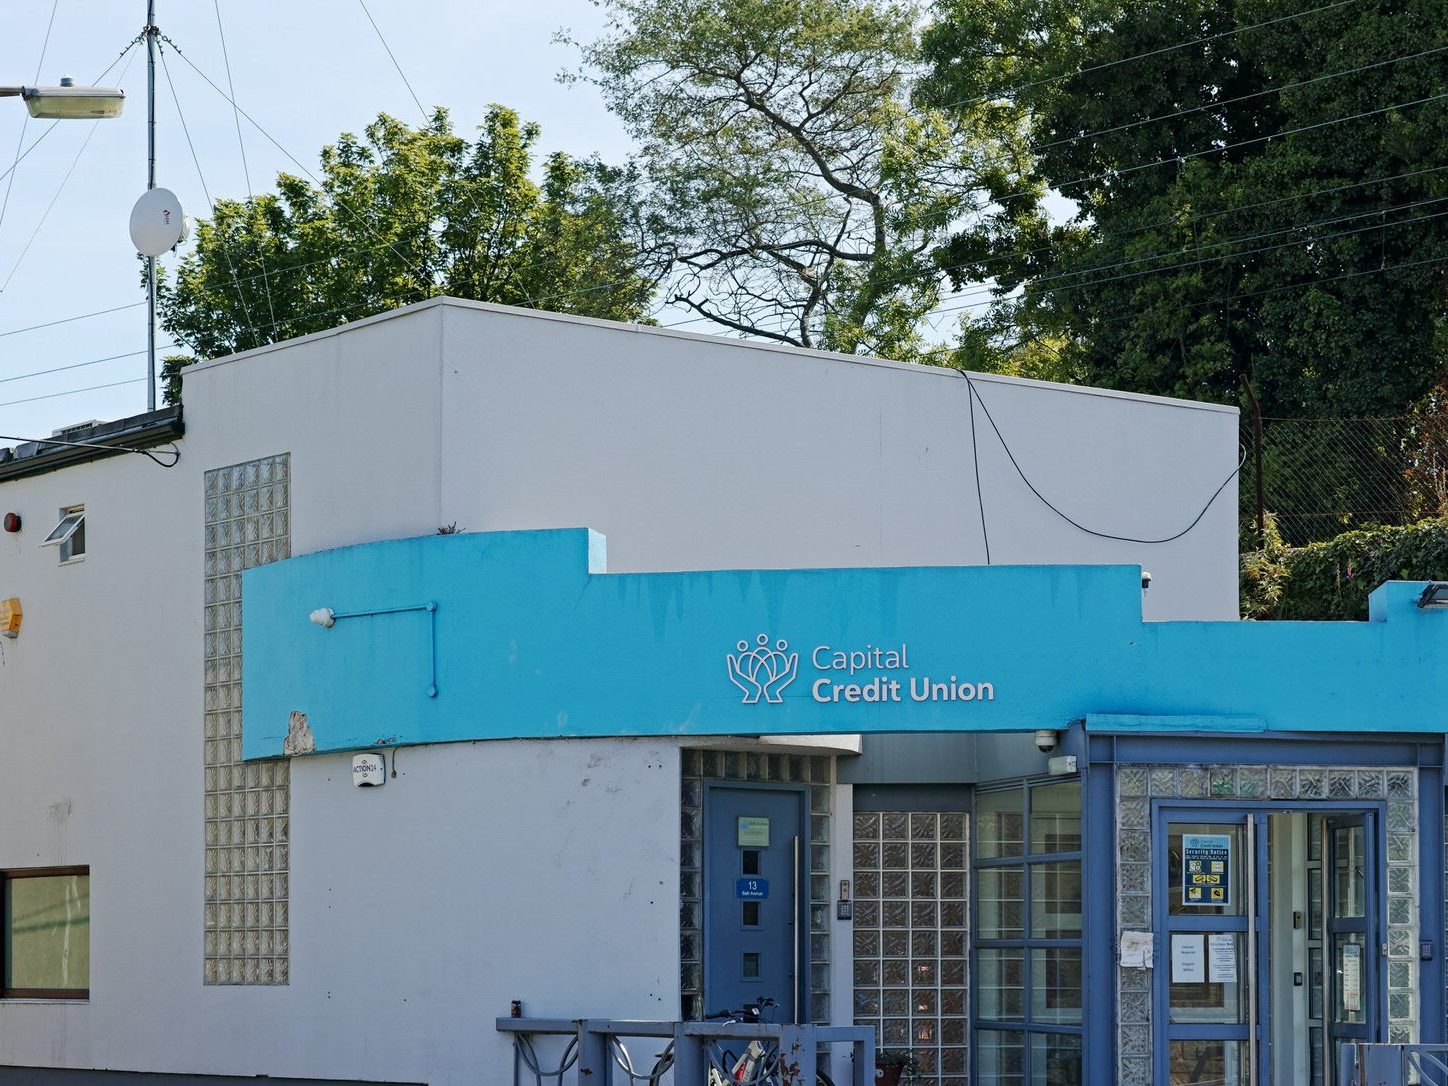 SANDYMOUNT CREDIT UNION - NOW CAPITAL CREDIT UNION [I LIKE THIS BUILDING] 003